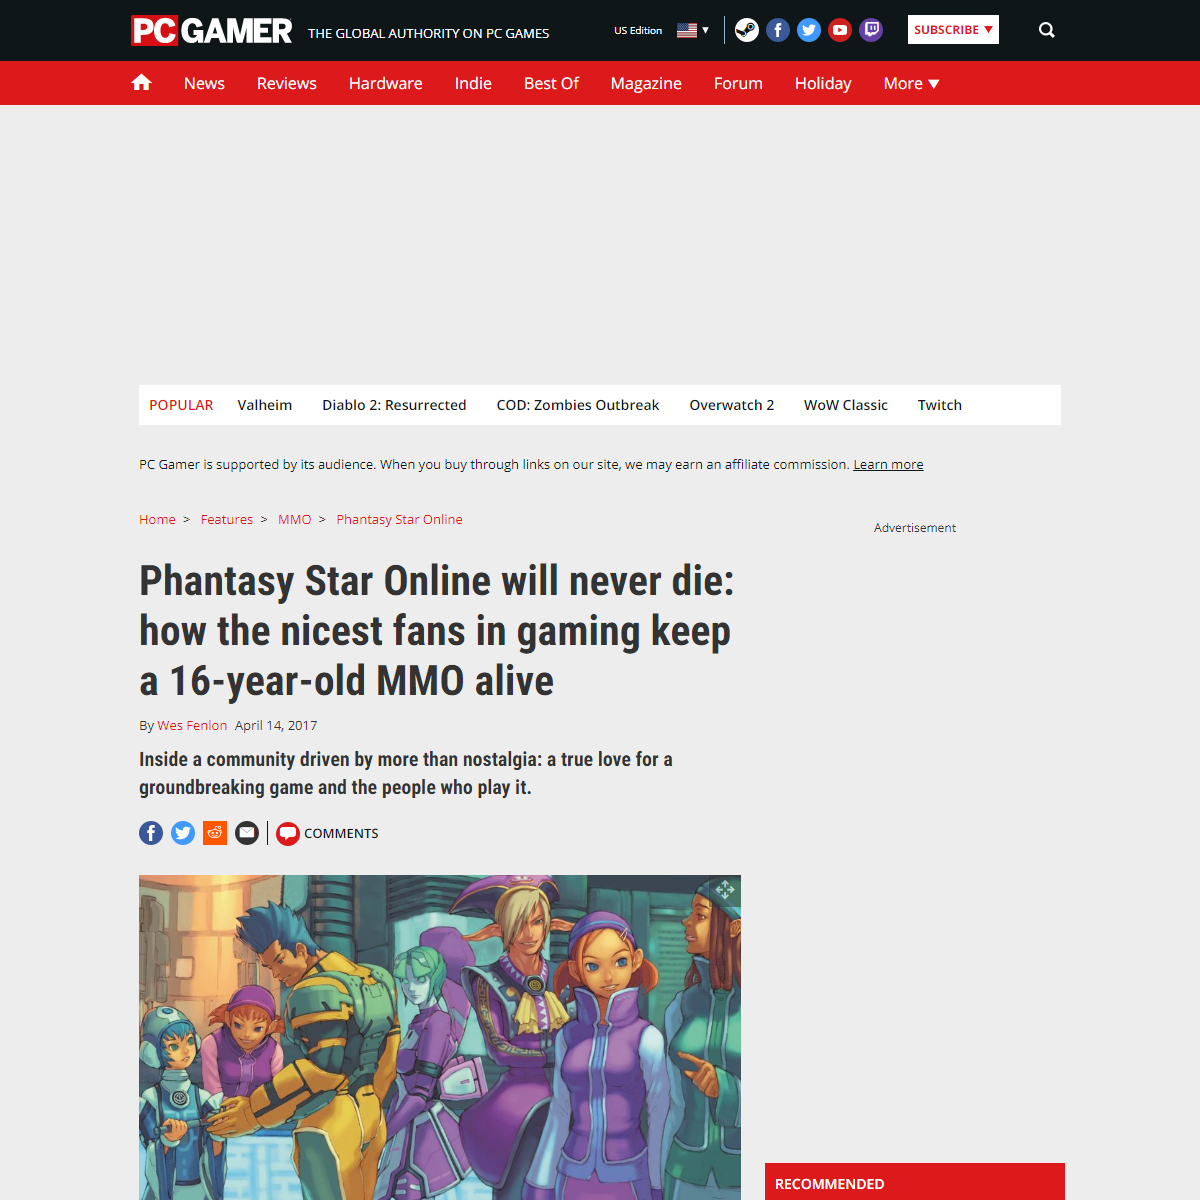 A complete backup of https://www.pcgamer.com/phantasy-star-online-will-never-die-how-the-nicest-fans-in-gaming-keep-a-16-year-ol